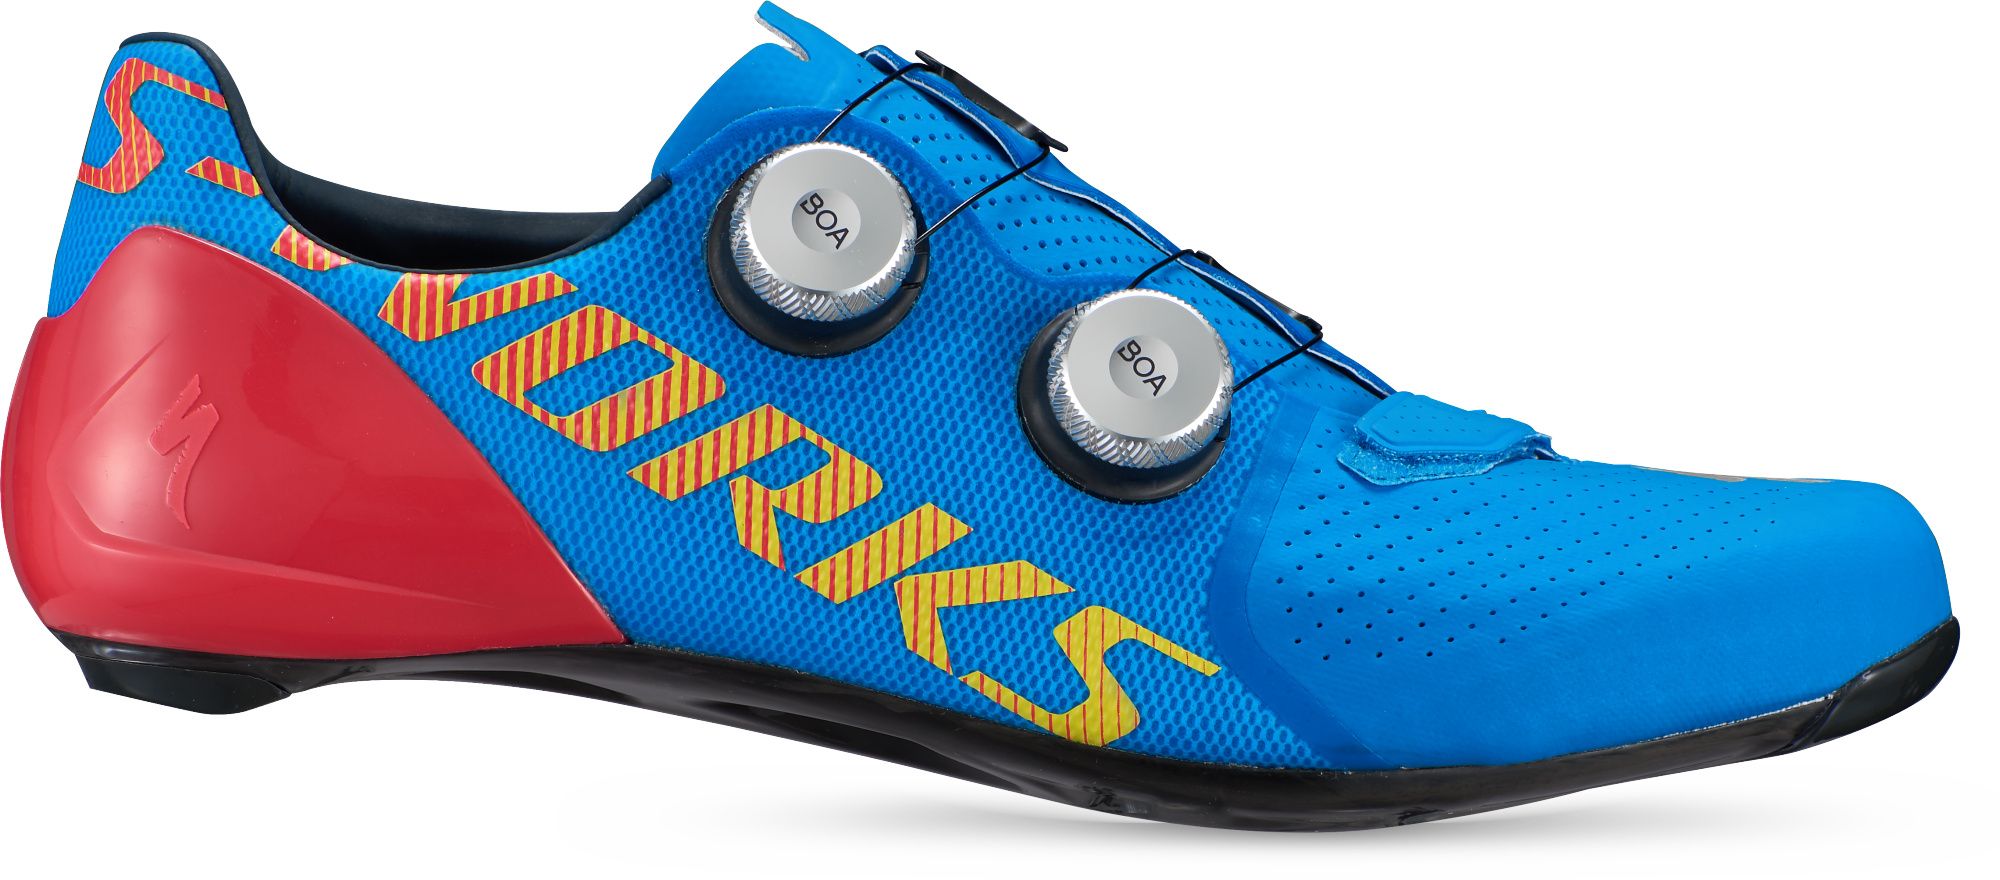 s works cycling shoes